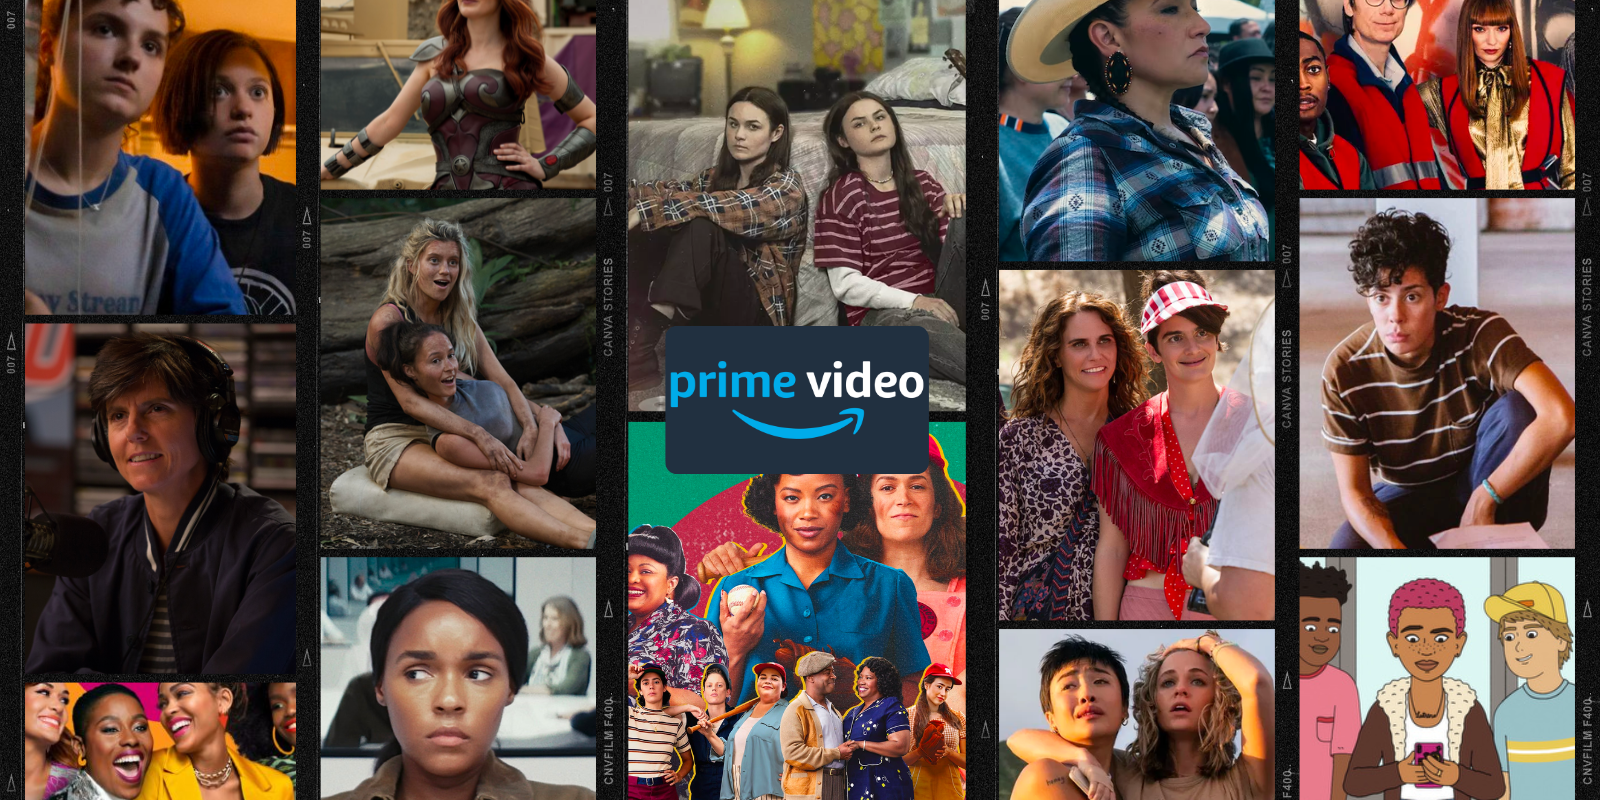 37 Lesbian, Queer and Bisexual Prime Video Original TV Shows